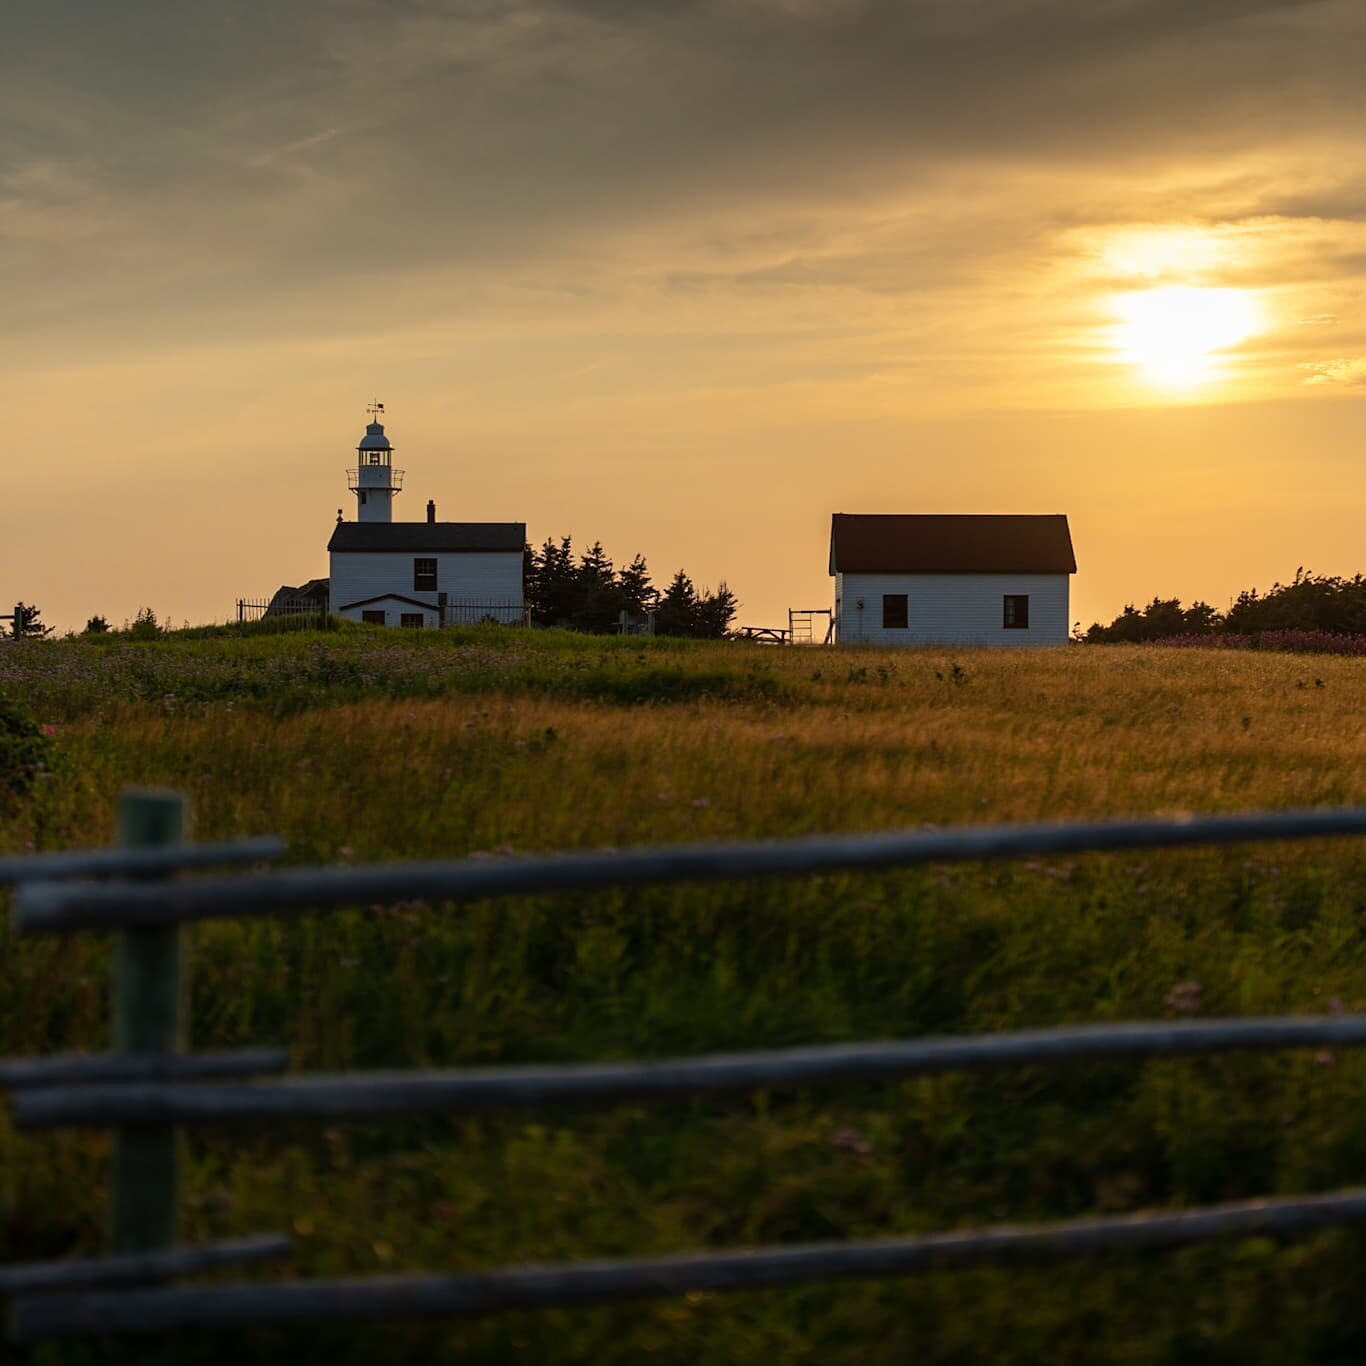 Lobster Cove Lighthouse at sunset #photography #sunset #lighthouse #photooftheday #landscape #landscapephotography #beauty